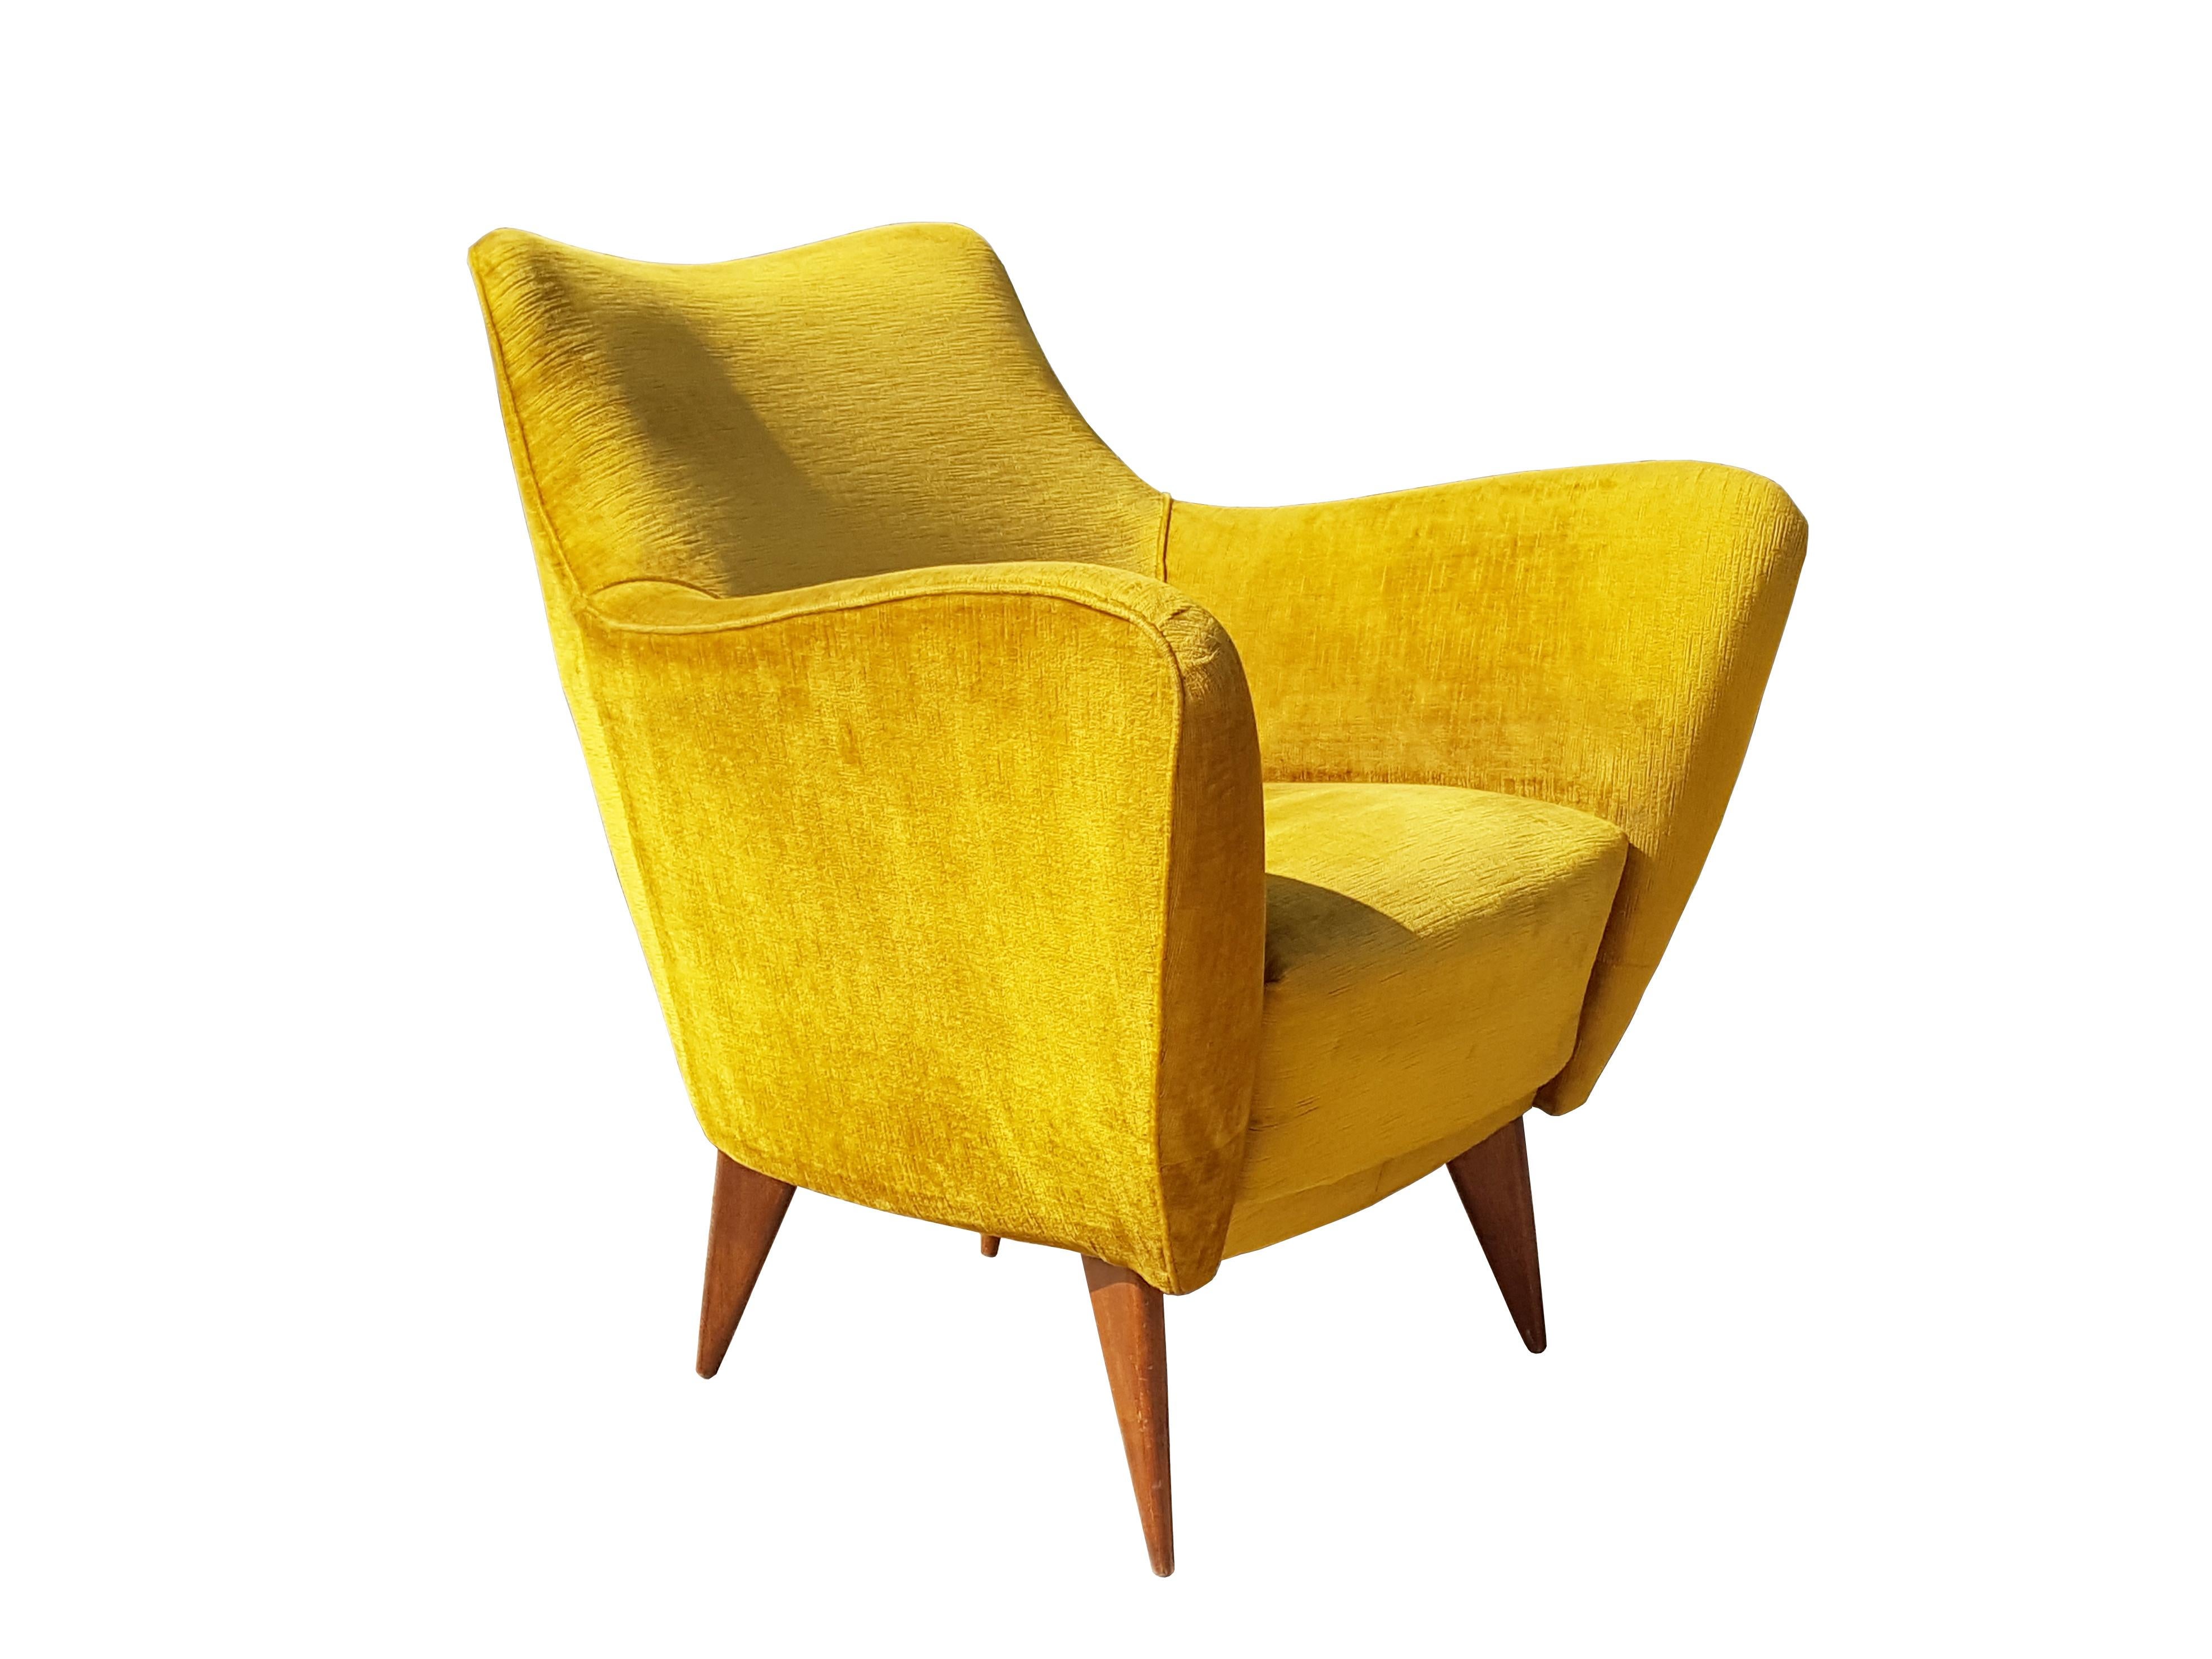 Pair of Ocra Yellow Velvet and Wood 1950s Perla Armchair by G. Veronesi for ISA In Good Condition For Sale In Varese, Lombardia